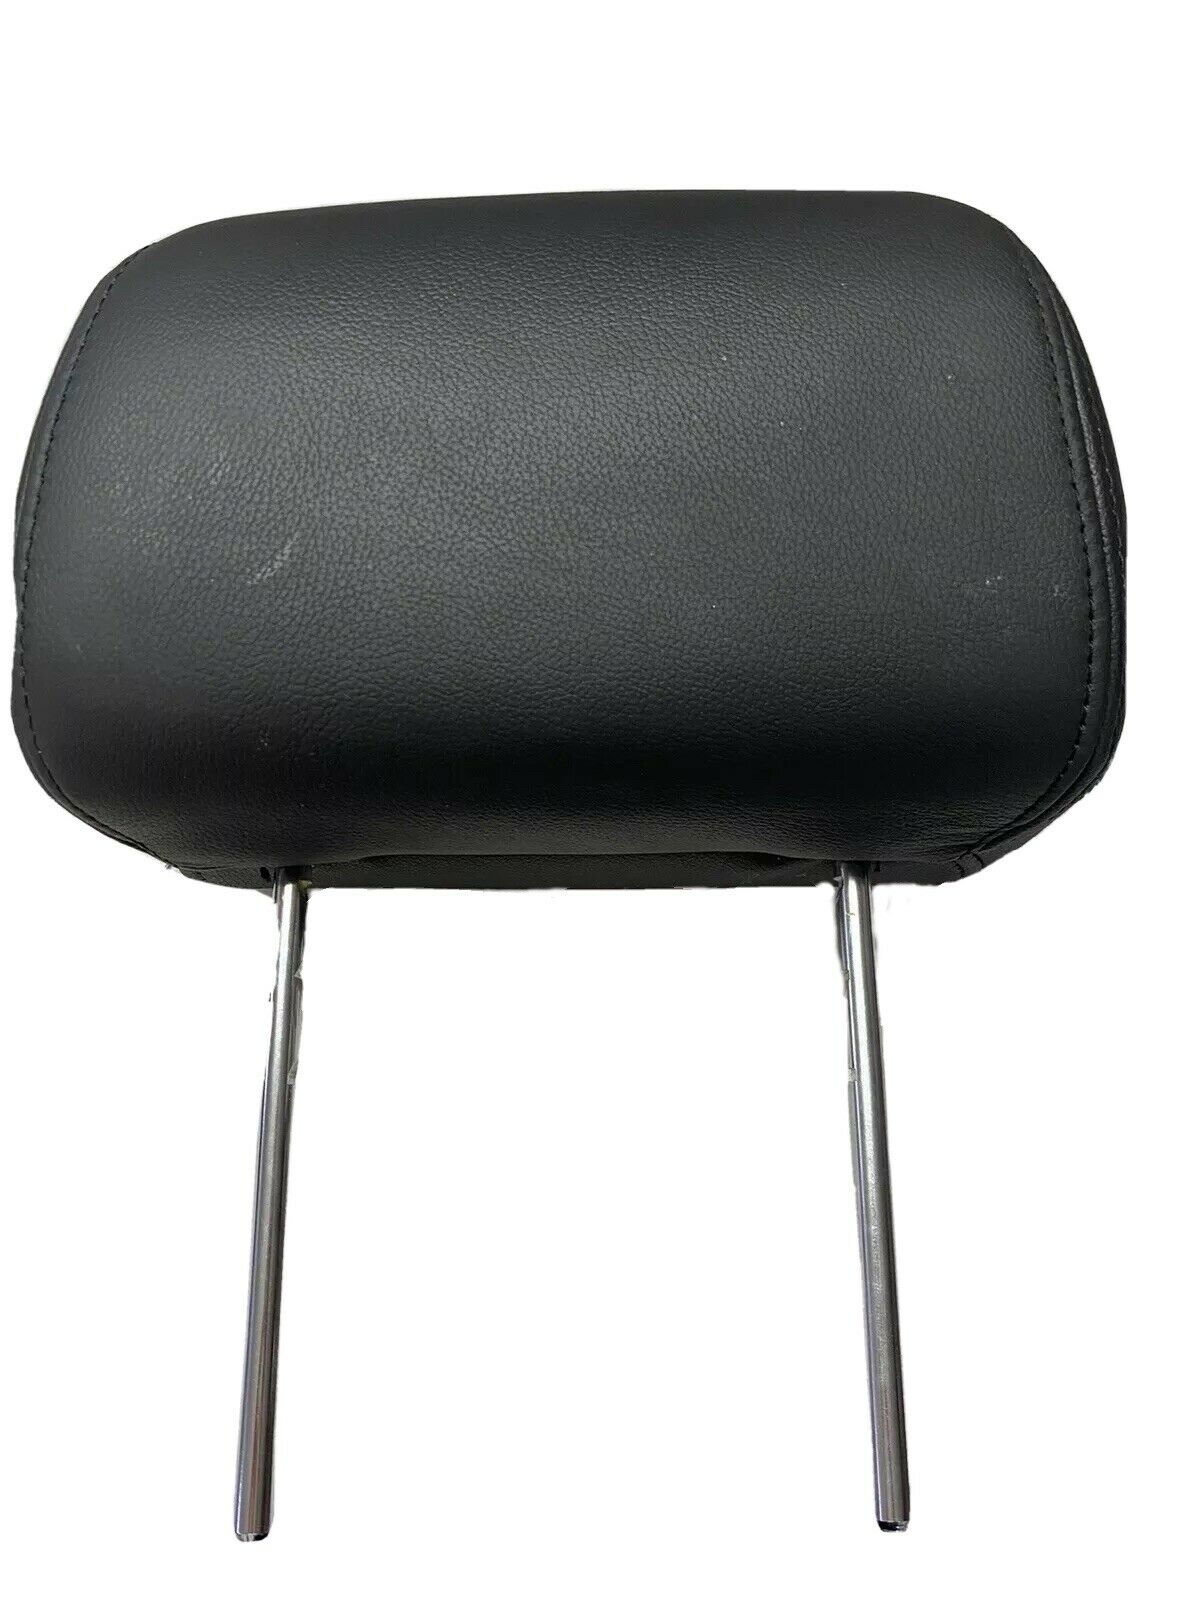 Holden Commodore VE Calais 2006-2013 Leather Headrest - All AutomotiveParts